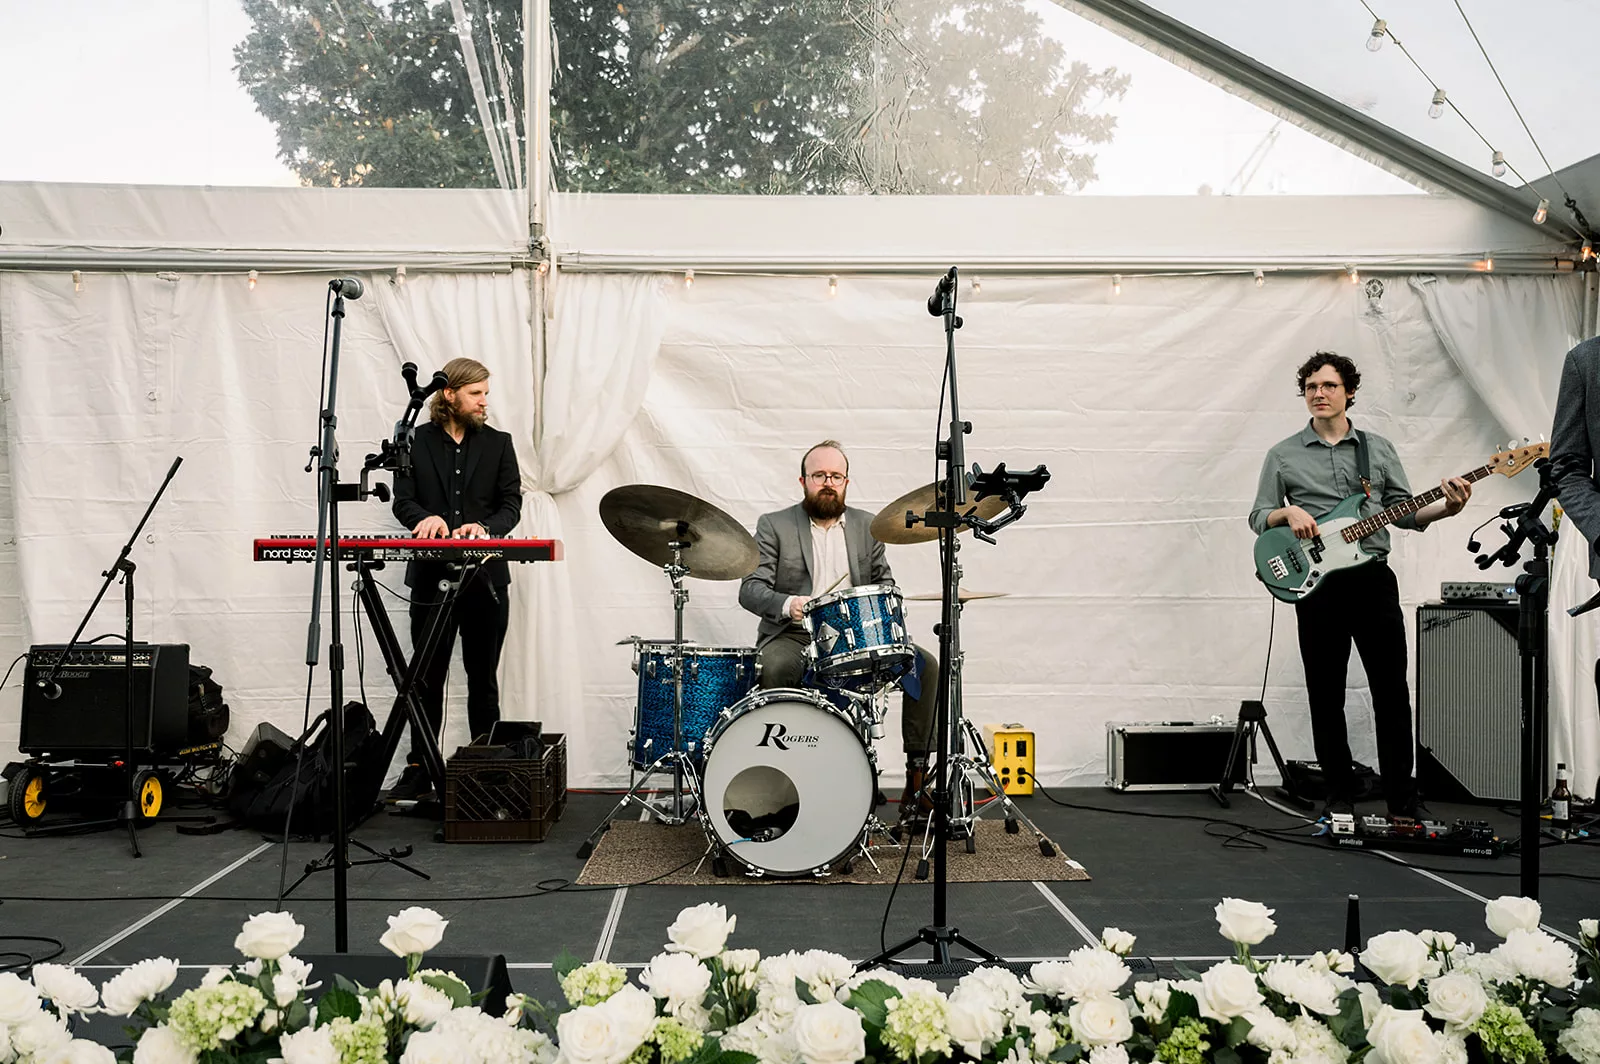 A band plays live for a wedding reception under a clear tent